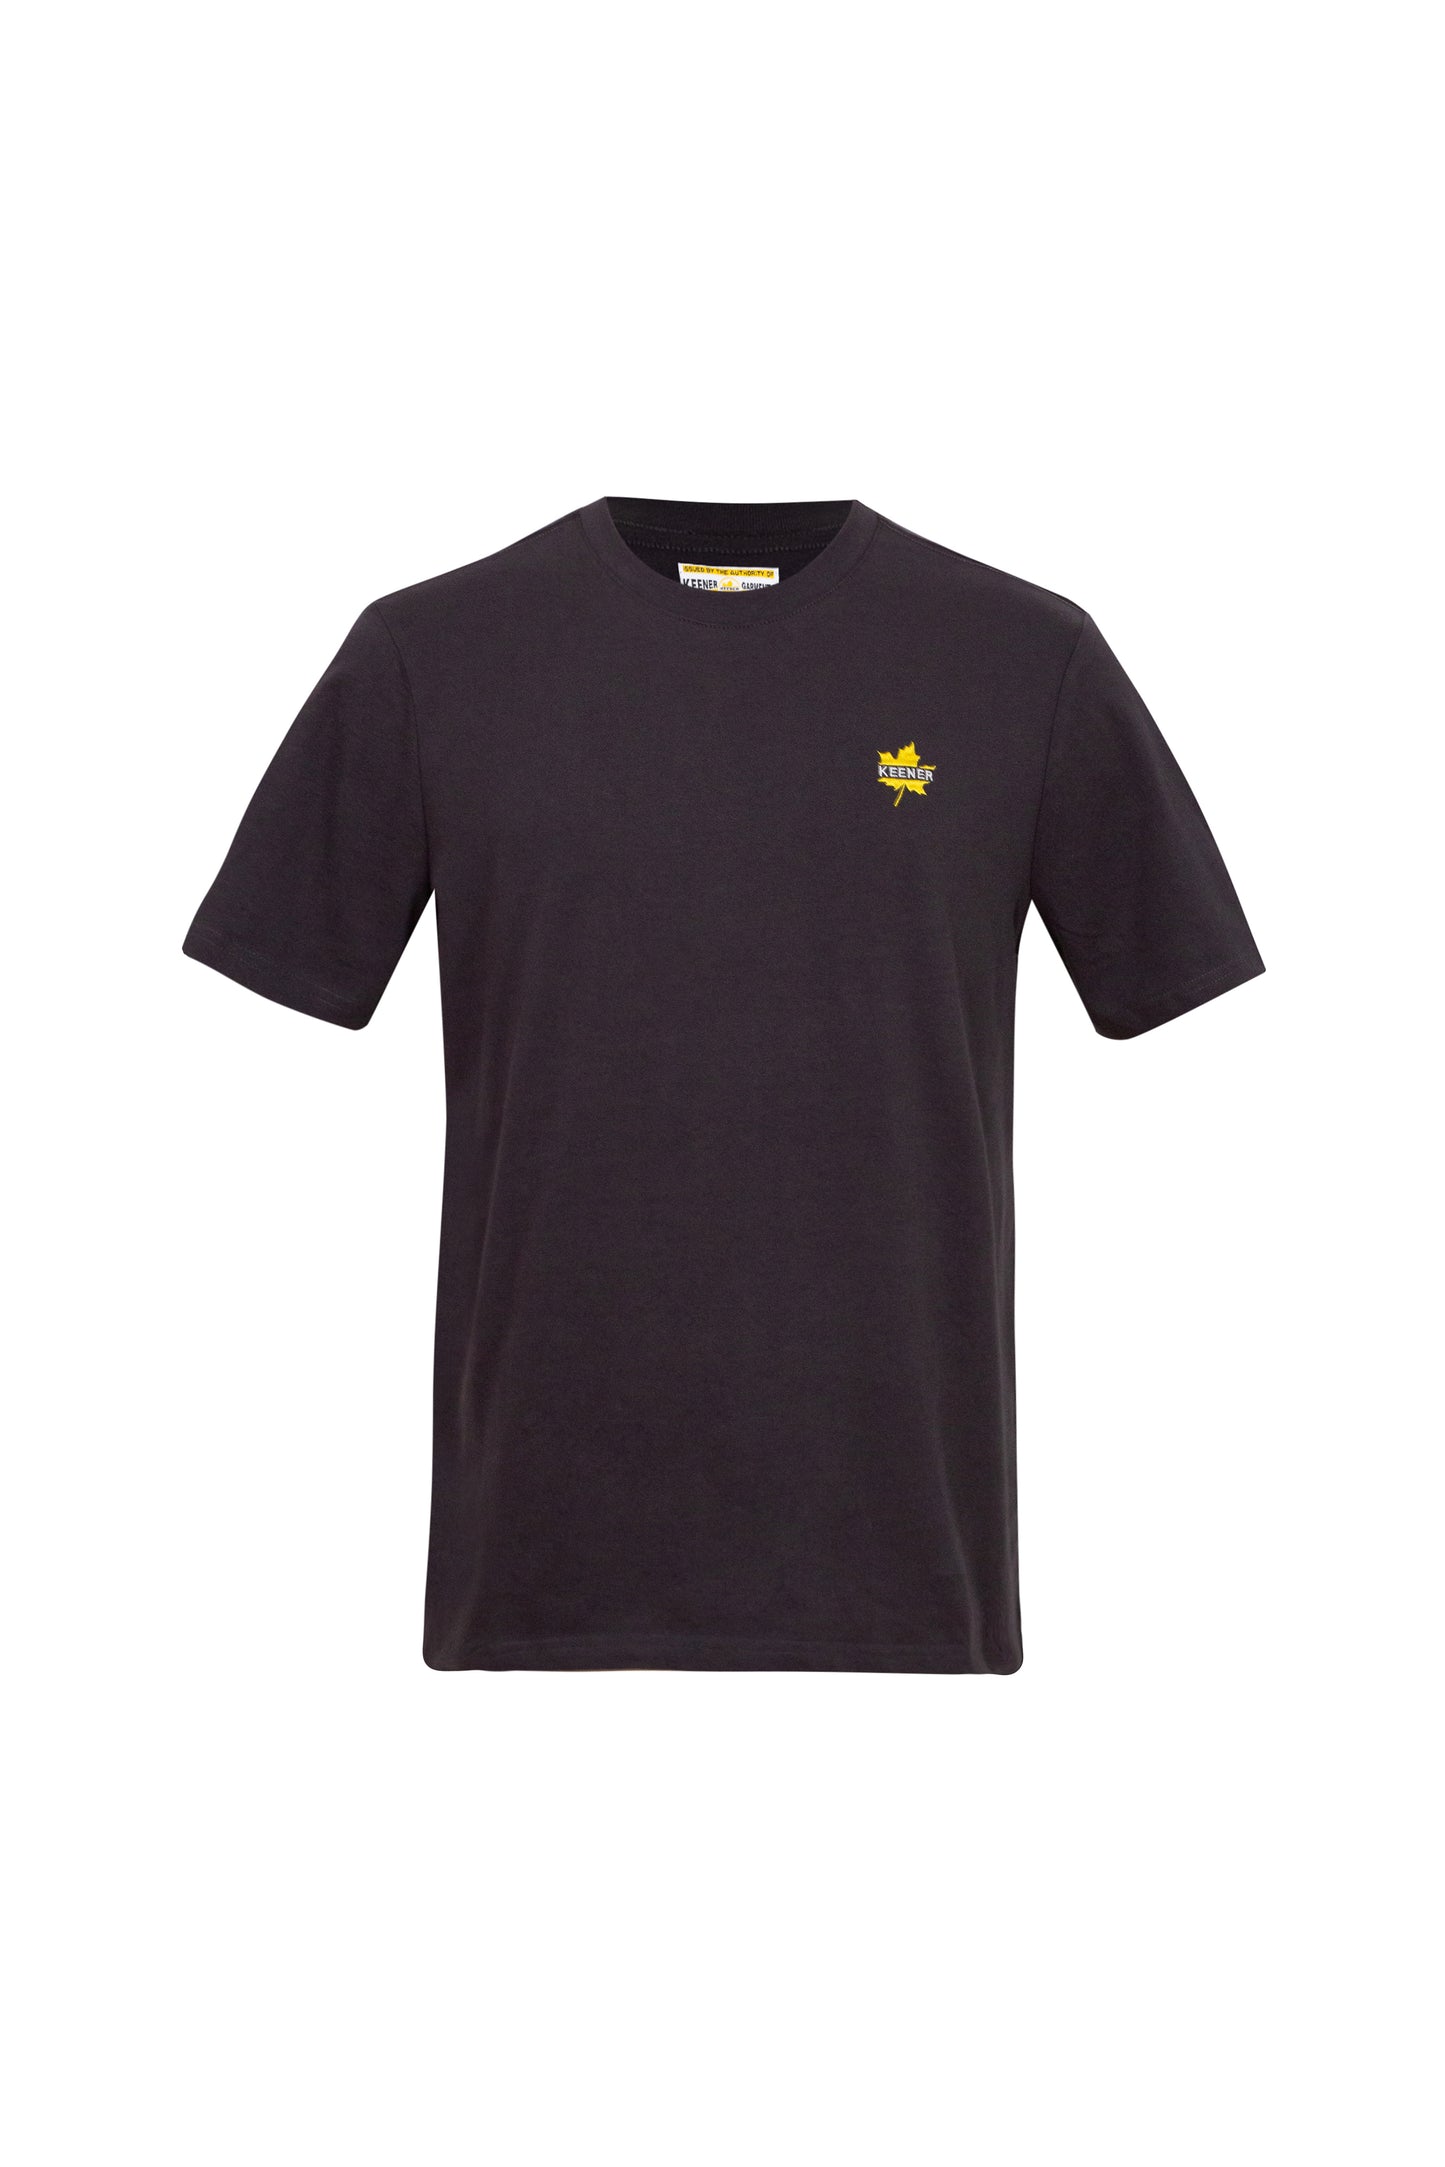 Logo t - faded black - front